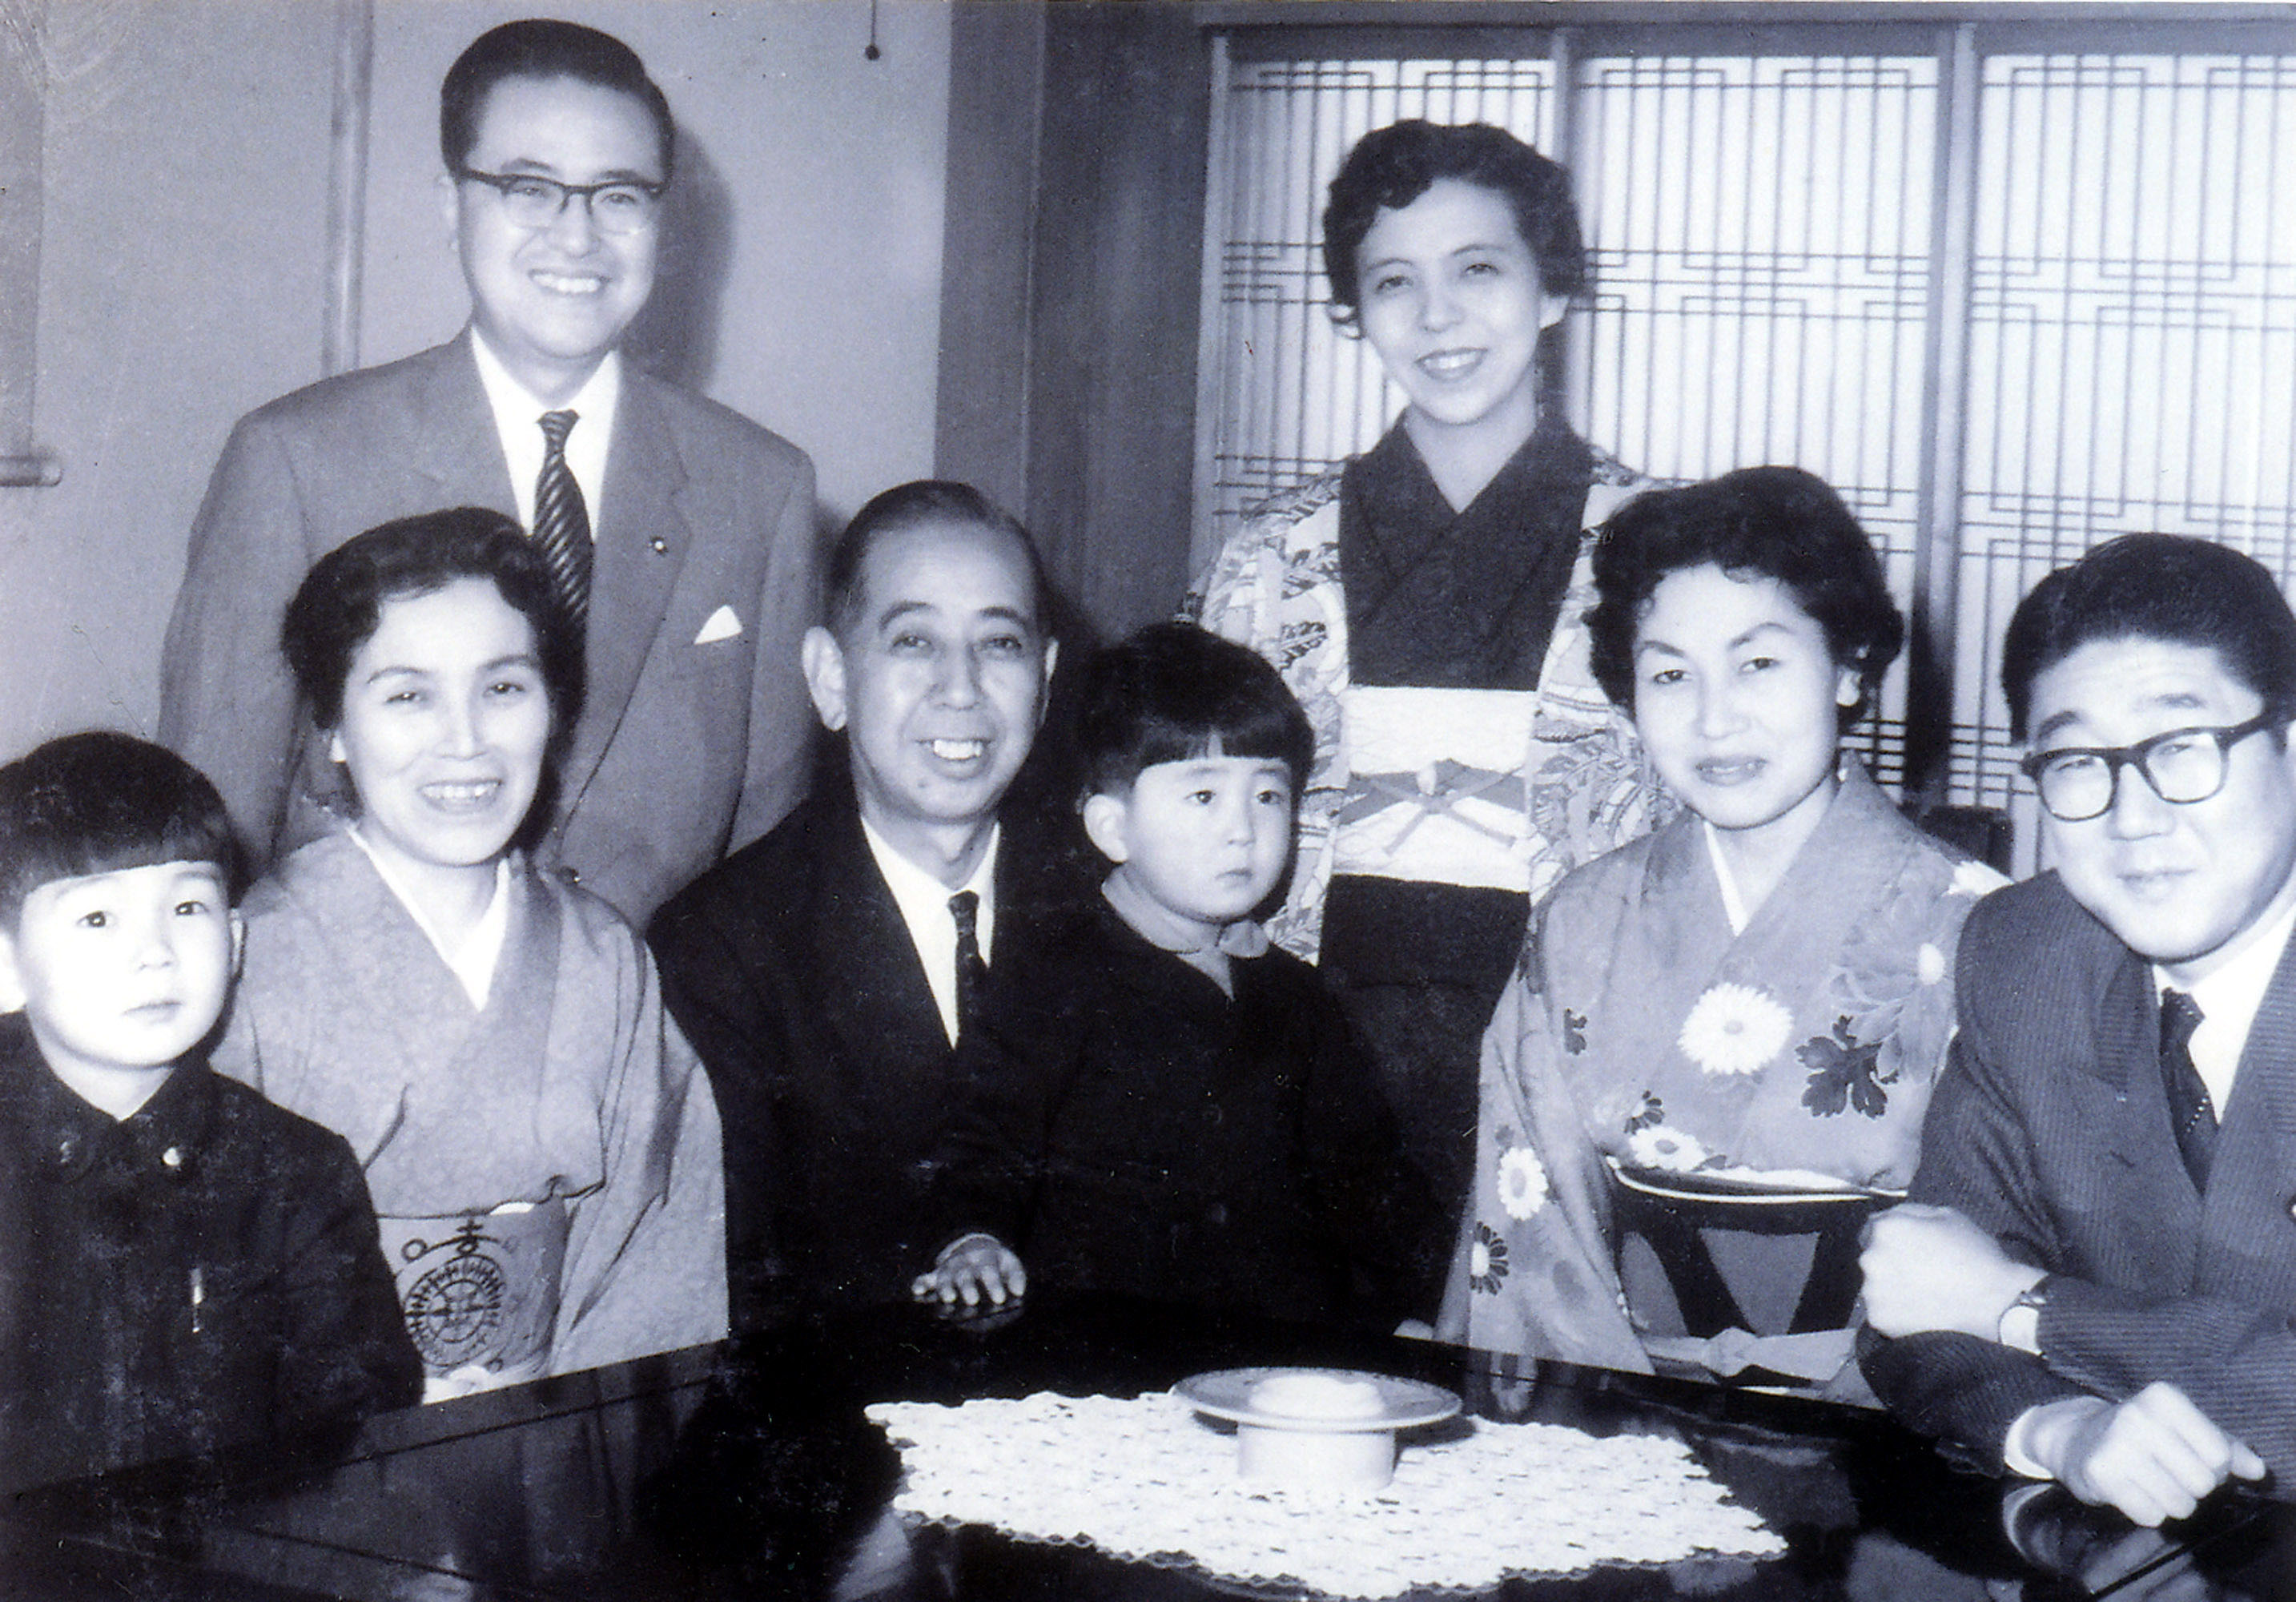 Connected kid: Kindergartner Shinzo Abe sits on the lap of his grandfather, then-Prime Minister Nobusuke Kishi, while his father, Shintaro Abe (right), mother, Yoko (standing), and older brother, Hironobu (left), pose for a family photo. | SHINZO ABE OFFICE / AP